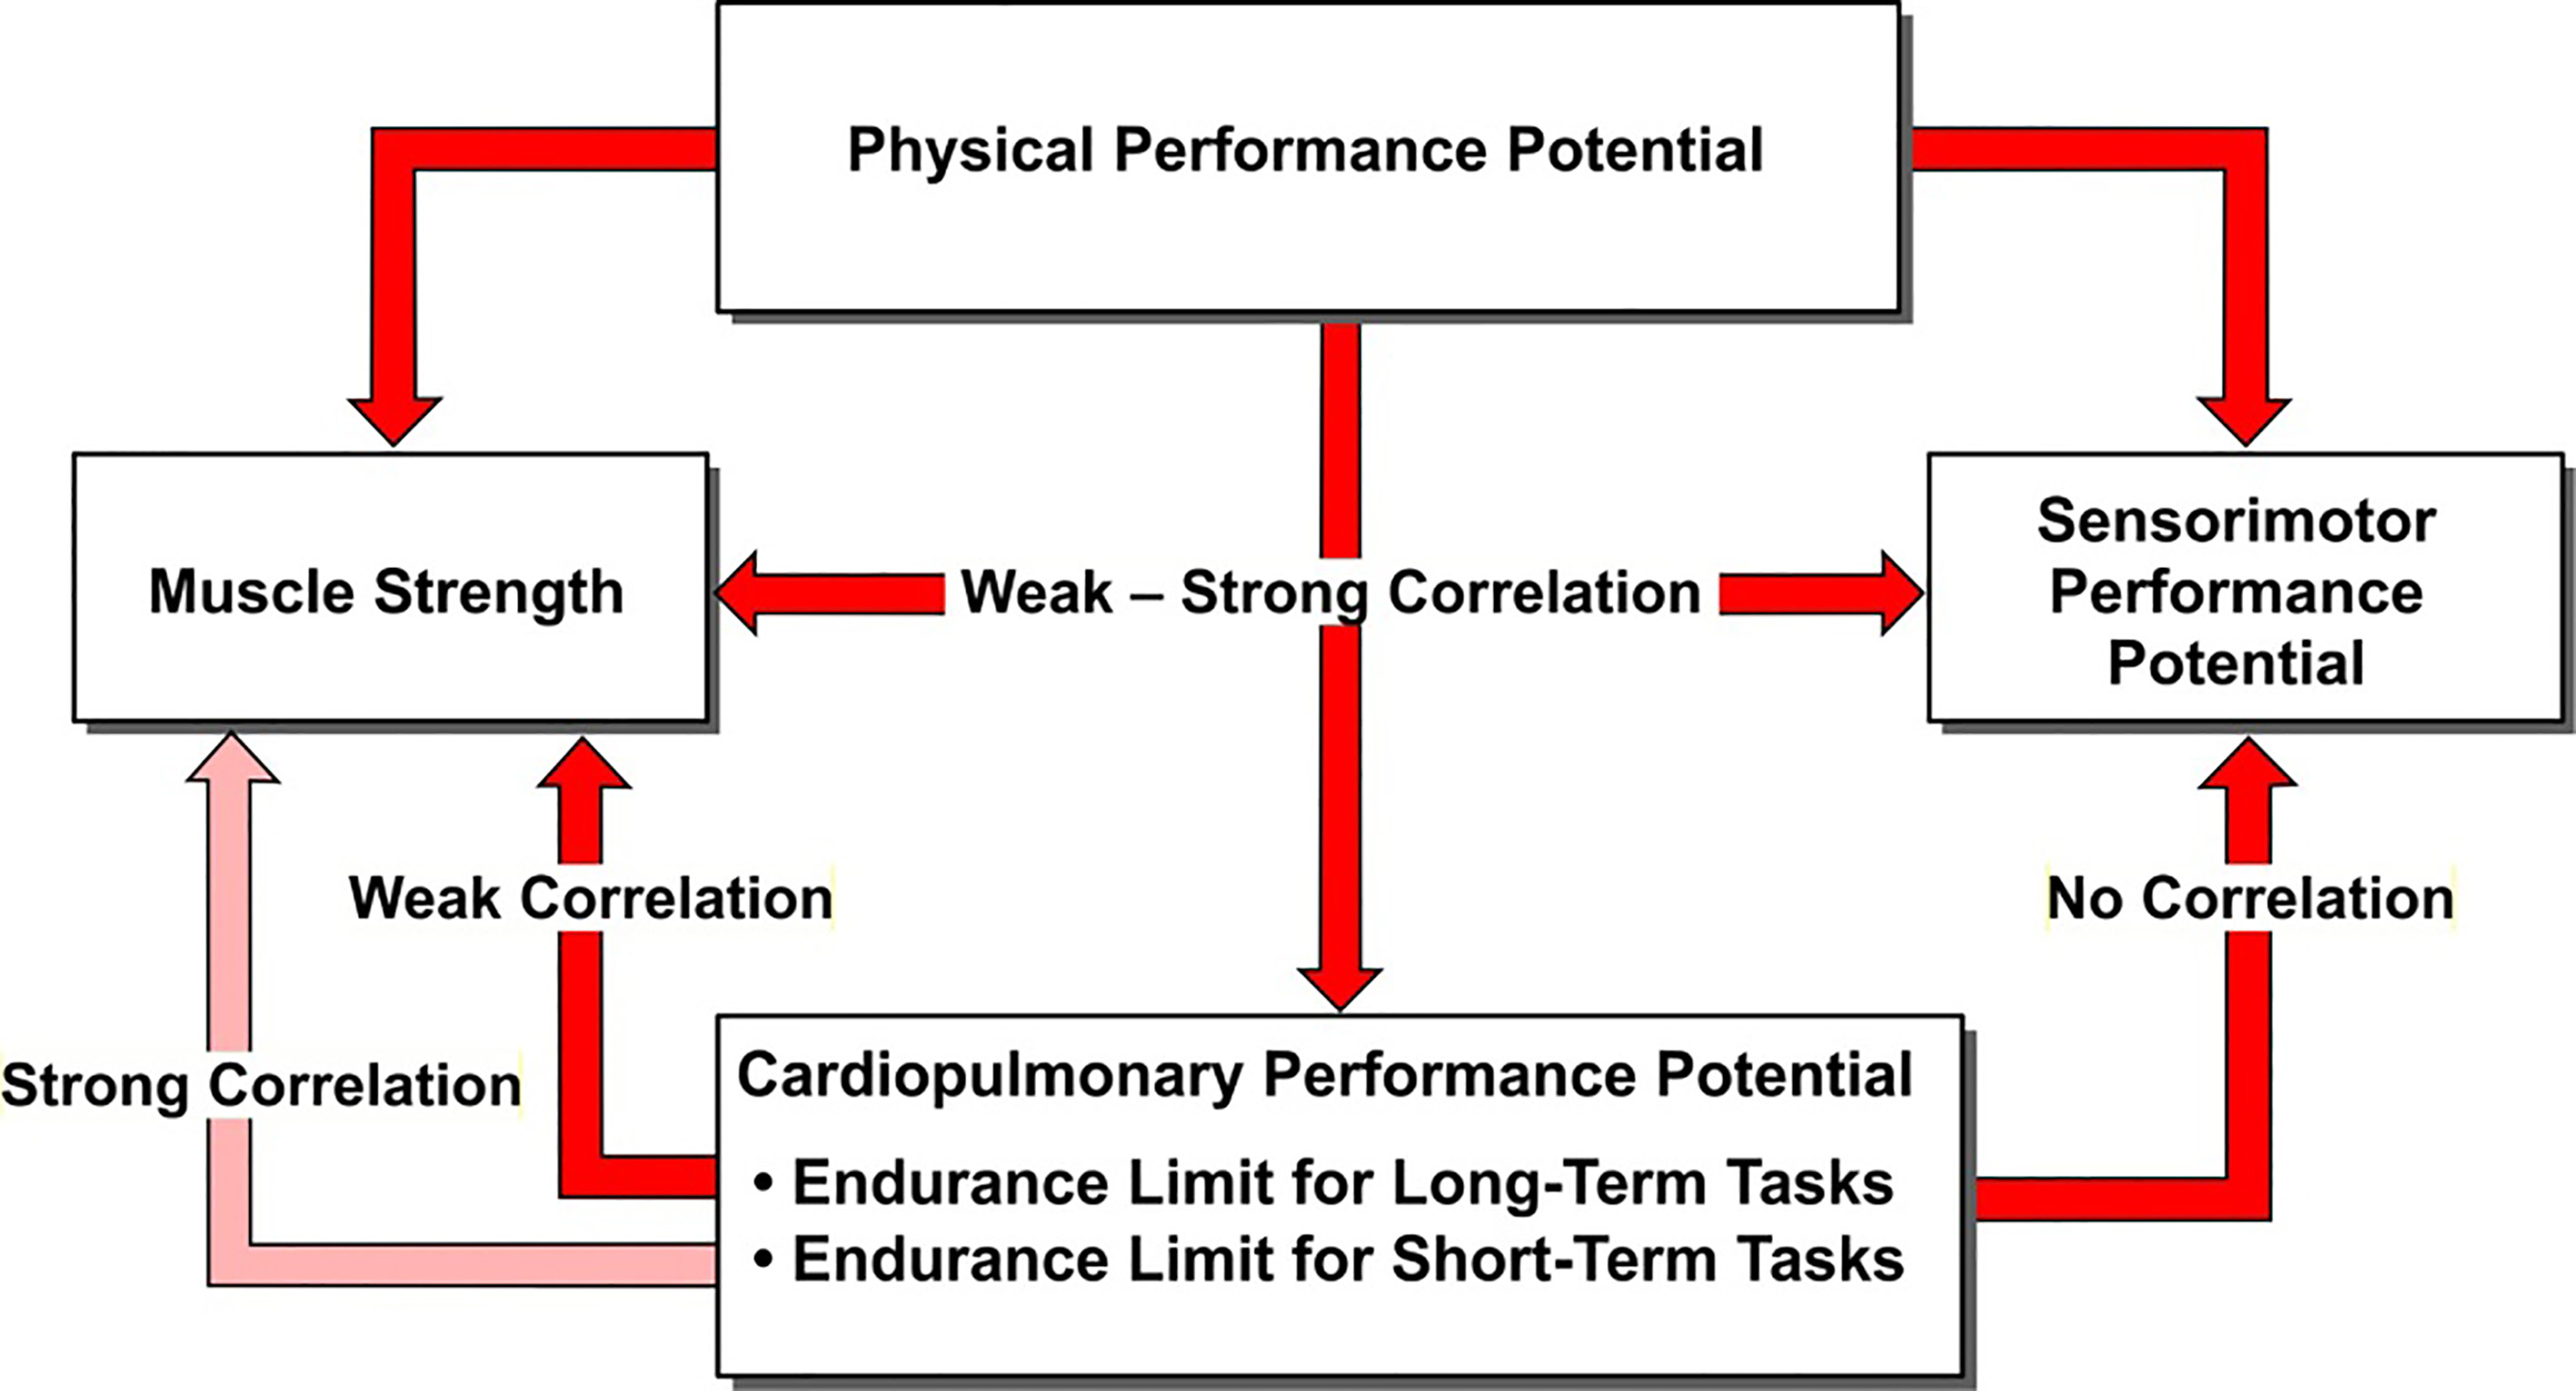 Outline of physical performance potential.